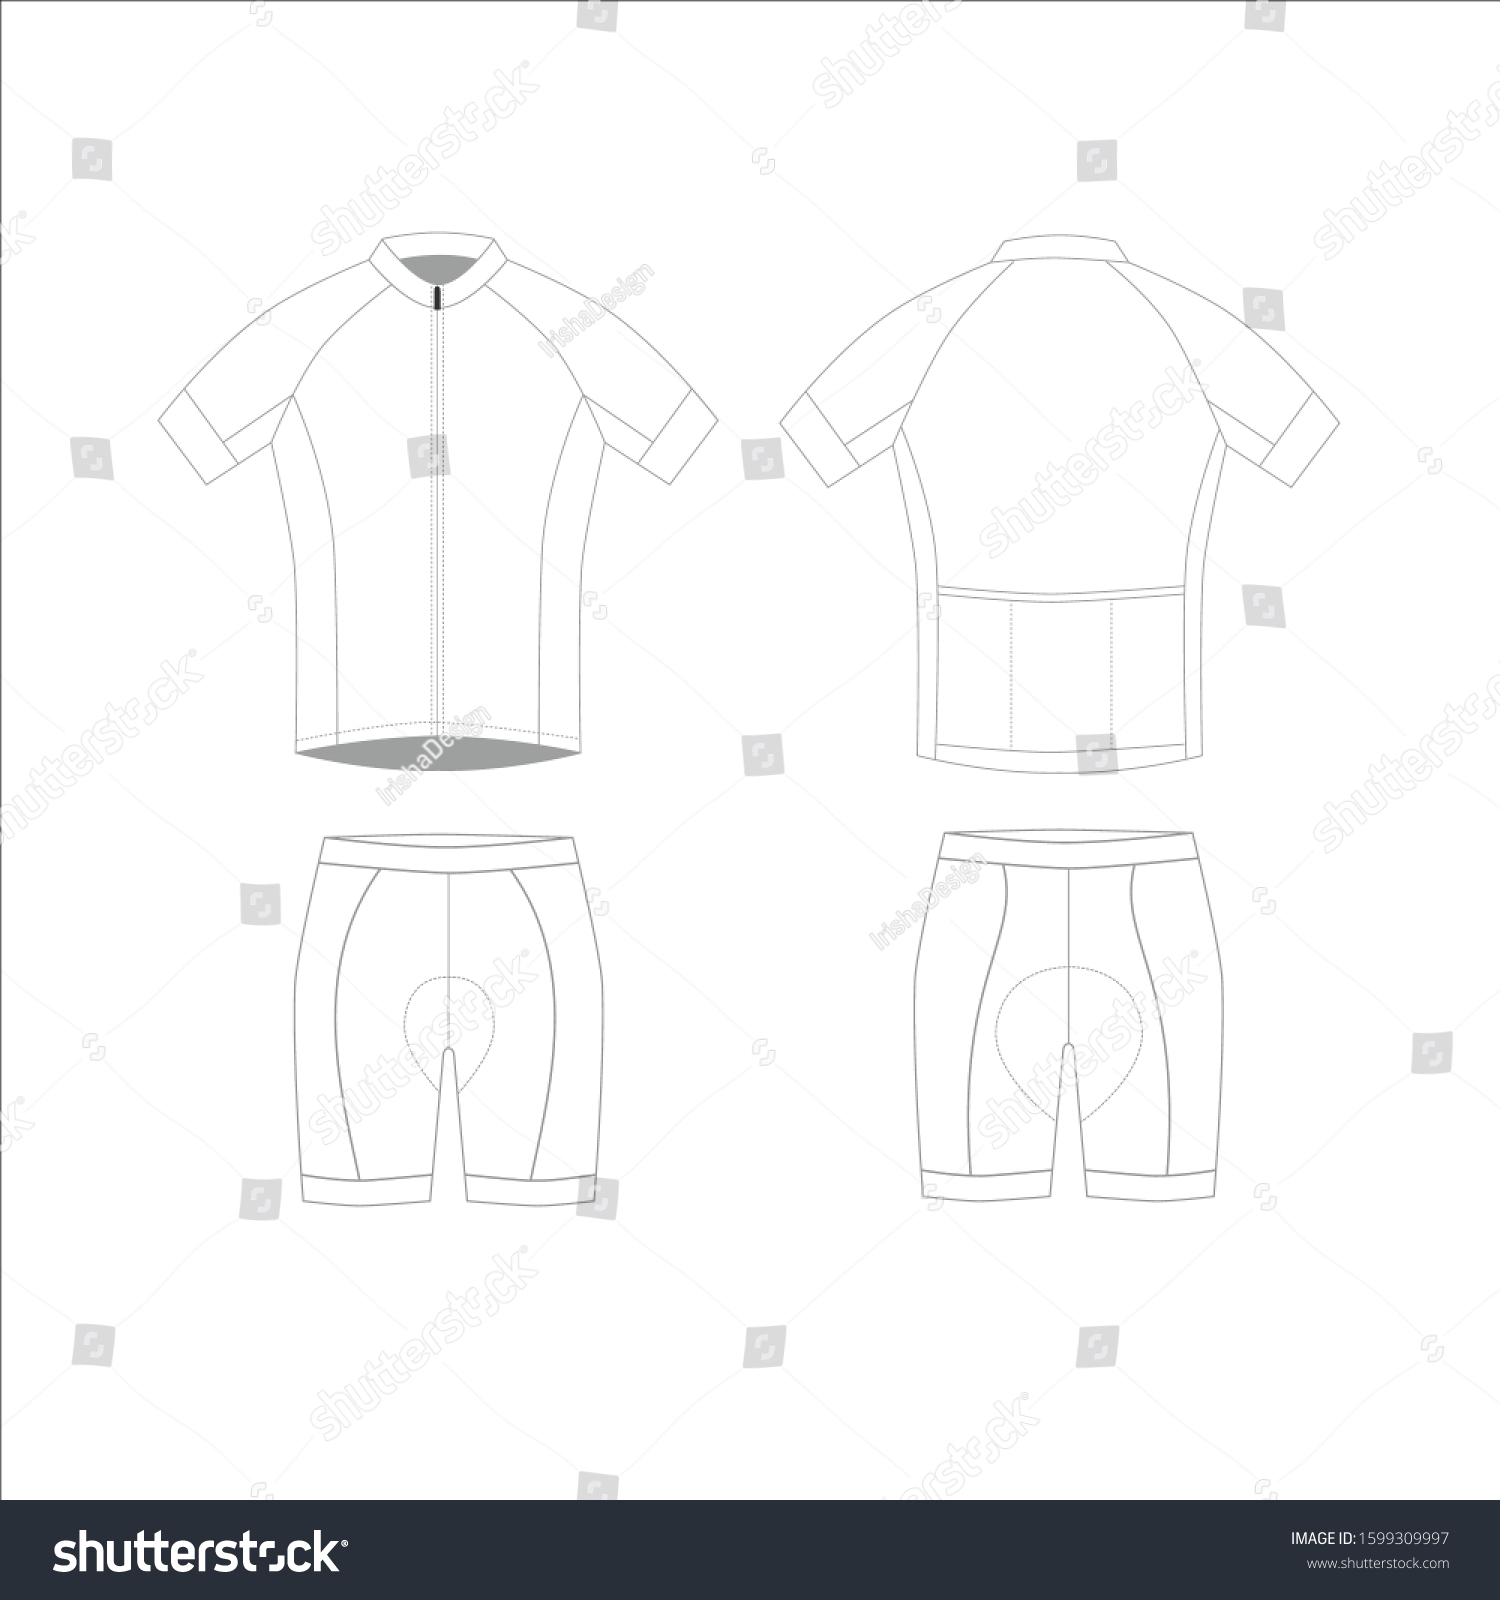 Cycling Jersey Vector Blank Template Stock Vector (Royalty Free Throughout Blank Cycling Jersey Template